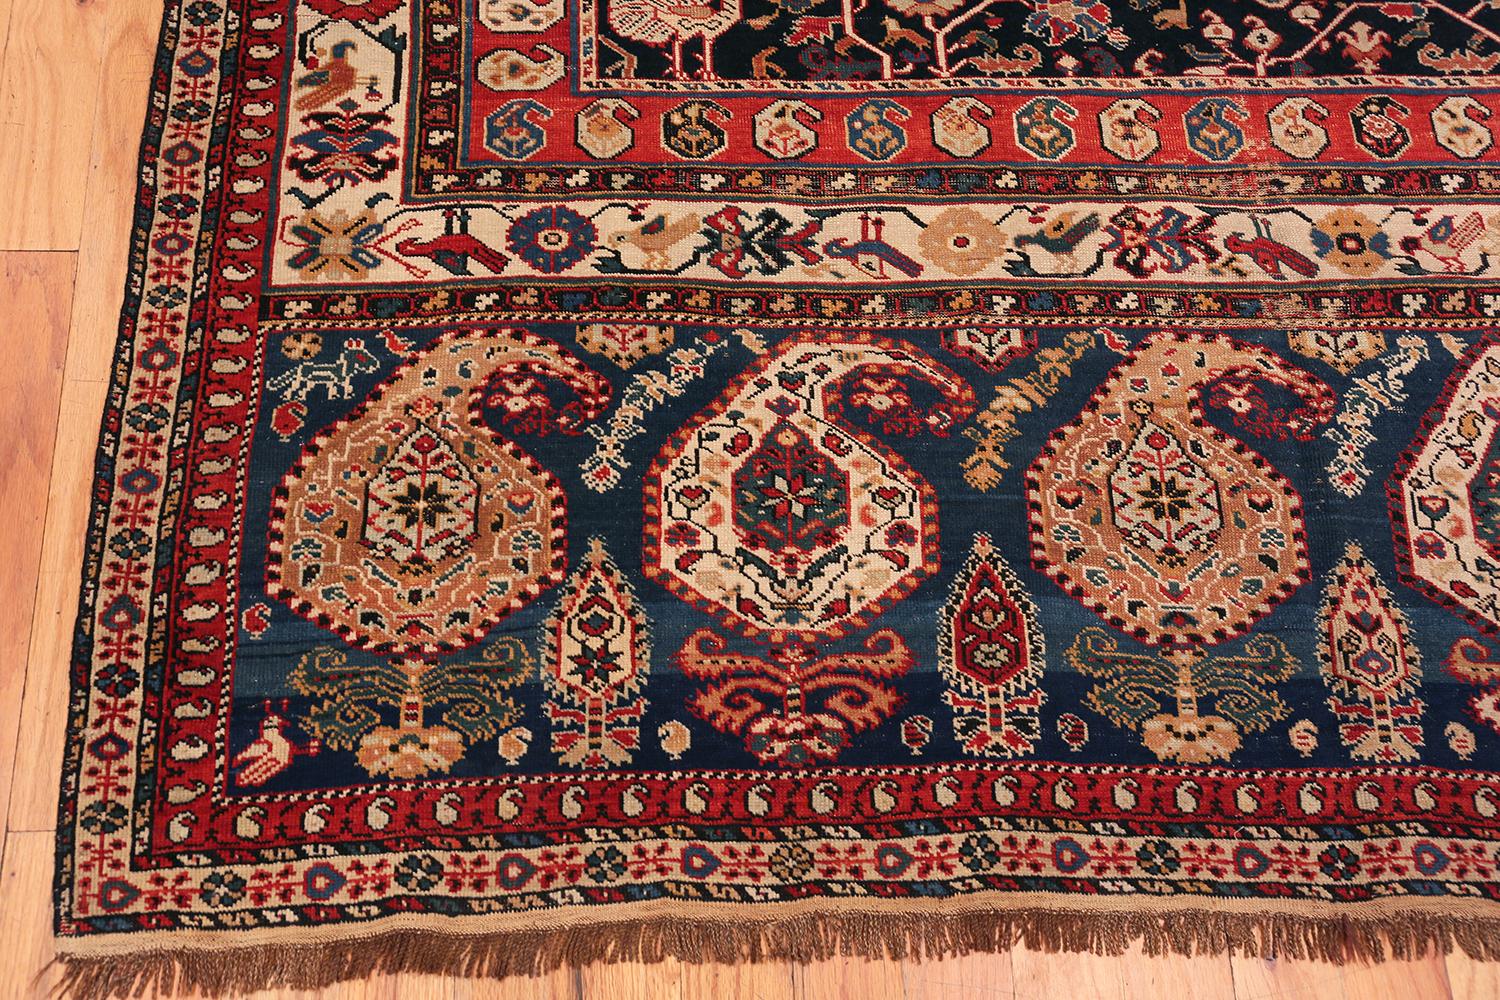 Hand-Knotted Nazmiyal Collection Antique Caucasian Baku Khila Rug. 6 ft 7 in x 7 ft 10 in